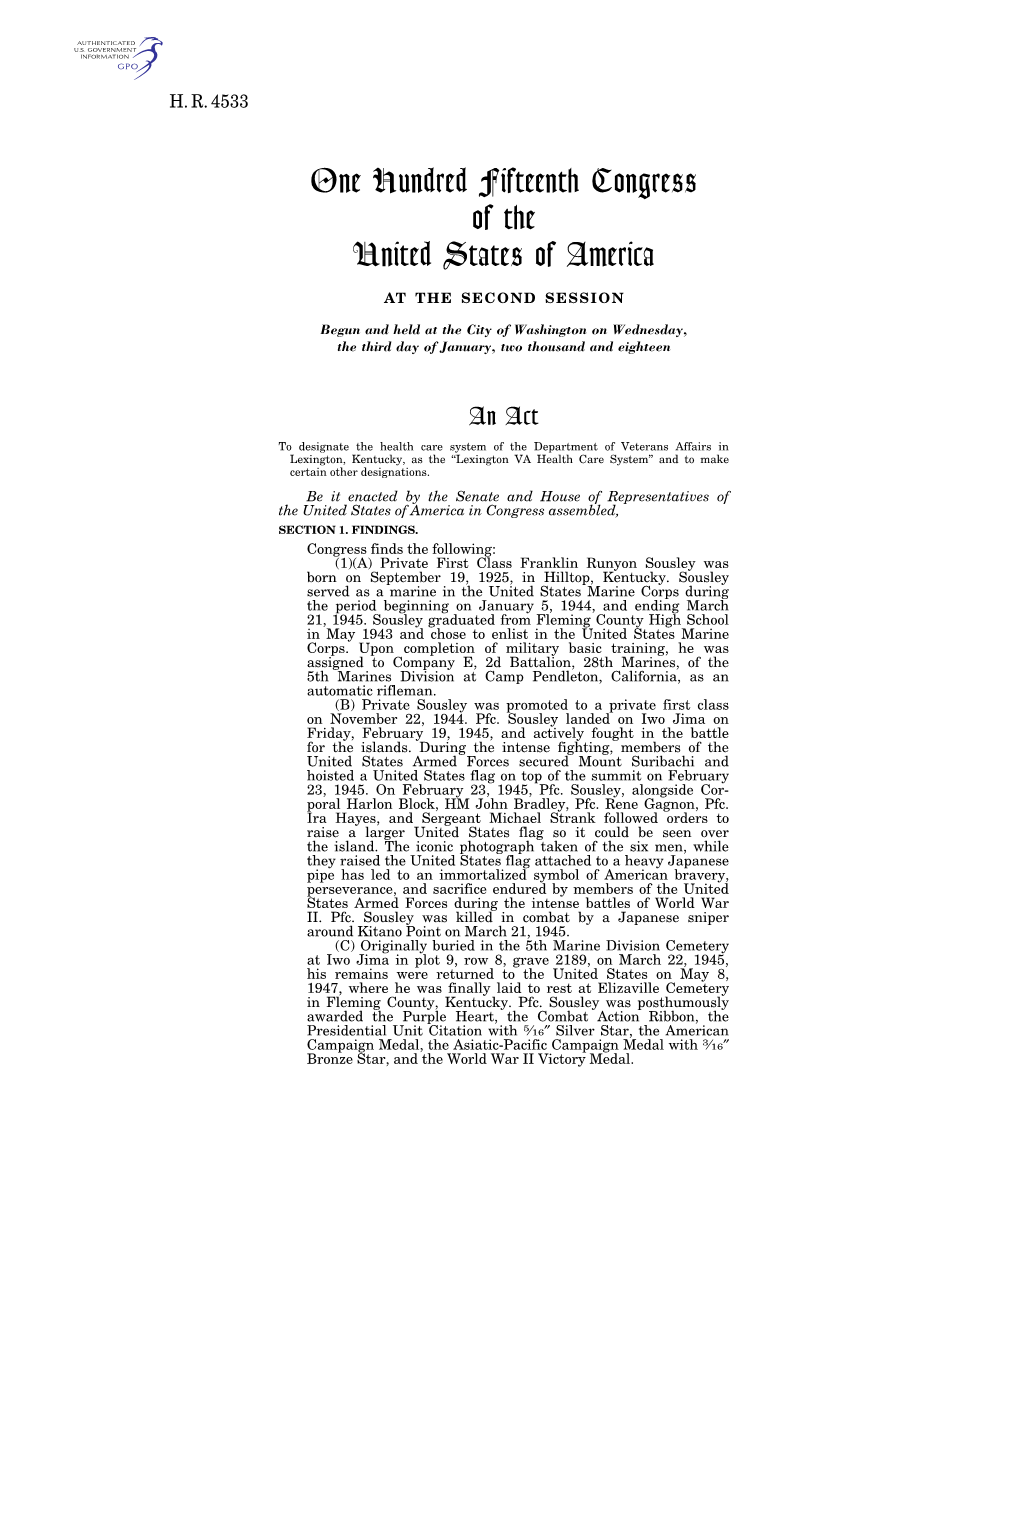 One Hundred Fifteenth Congress of the United States of America